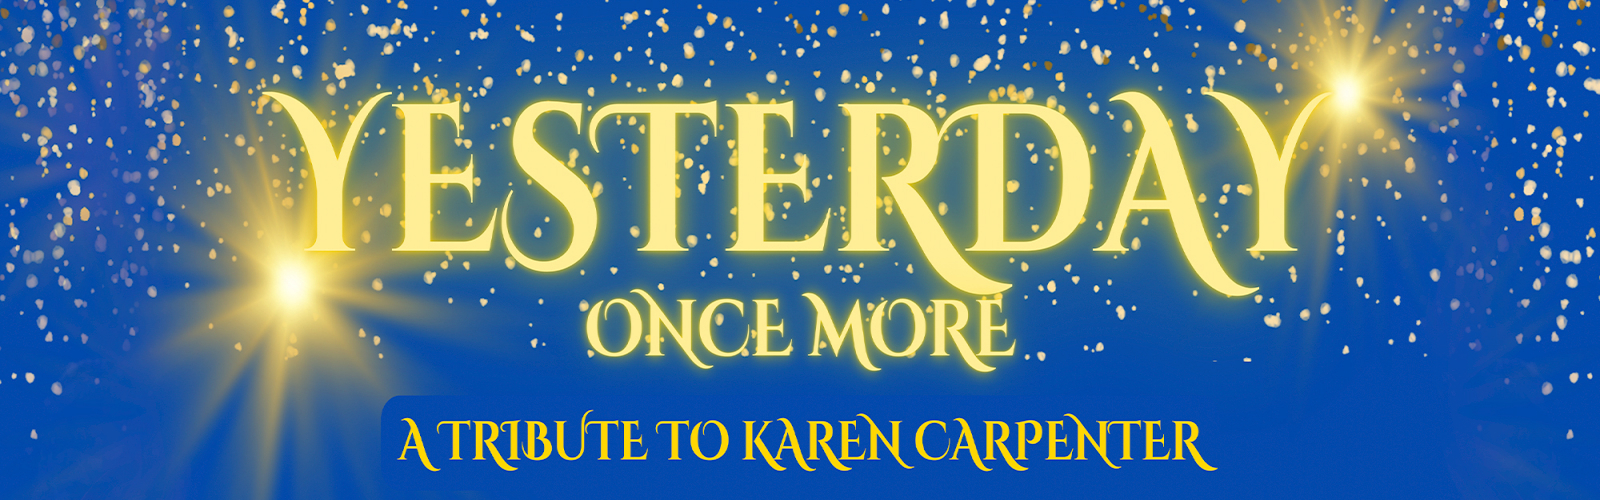 YESTERDAY ONCE MORE: A TRIBUTE TO KAREN CARPENTER